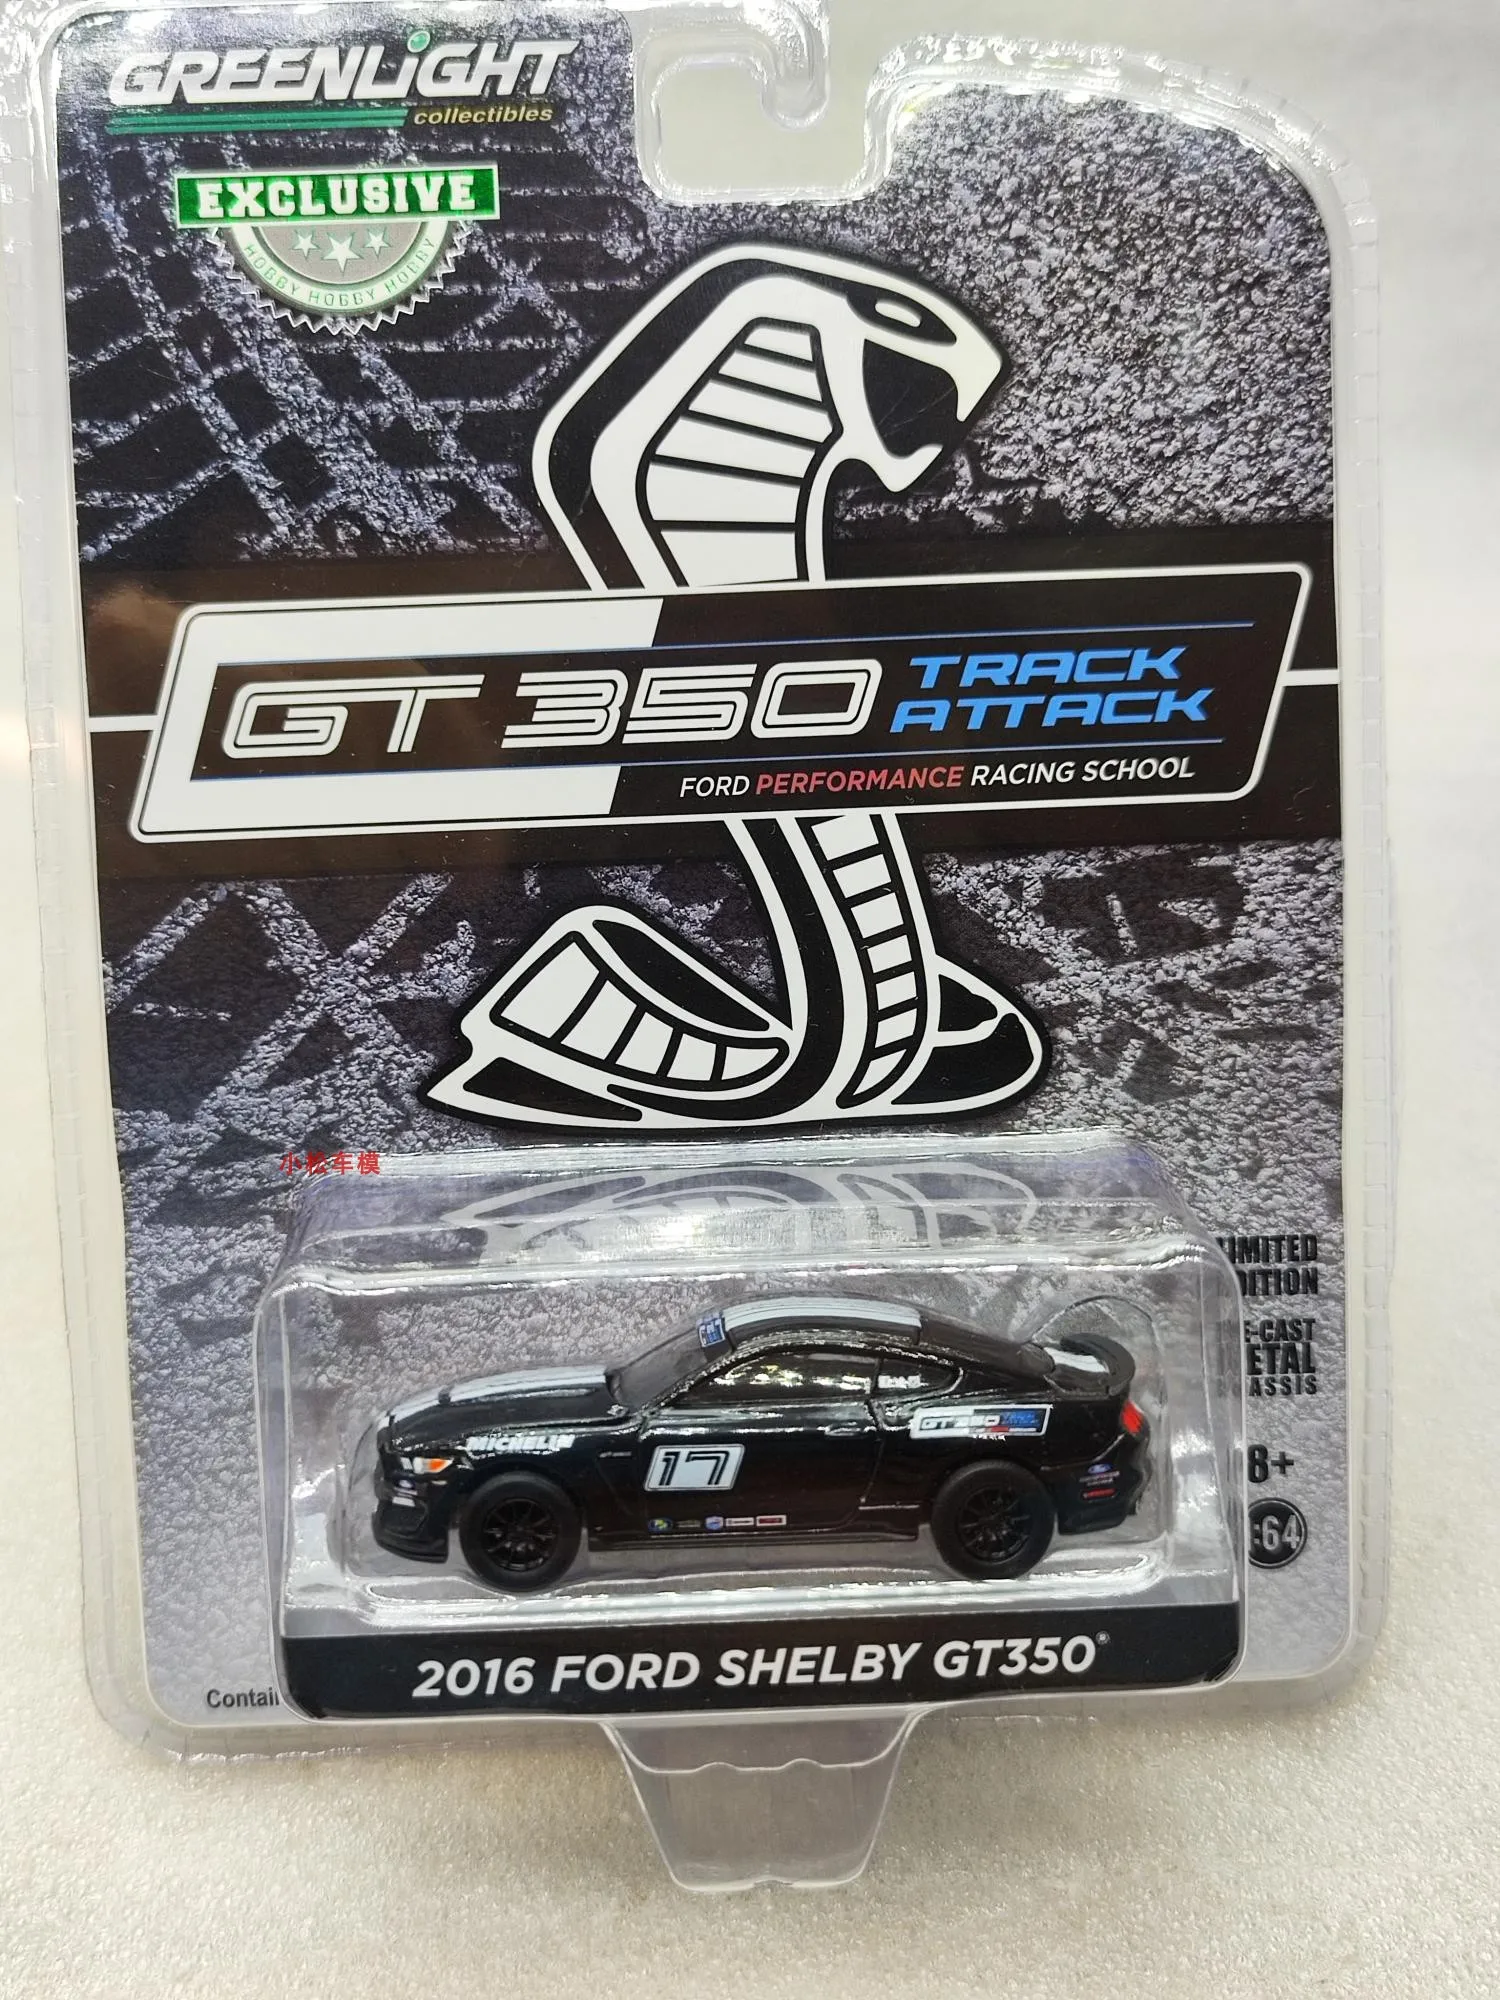 

1:64 2016 Ford Mustang Shelby GT350- Ford Performance Racing Collection of car models